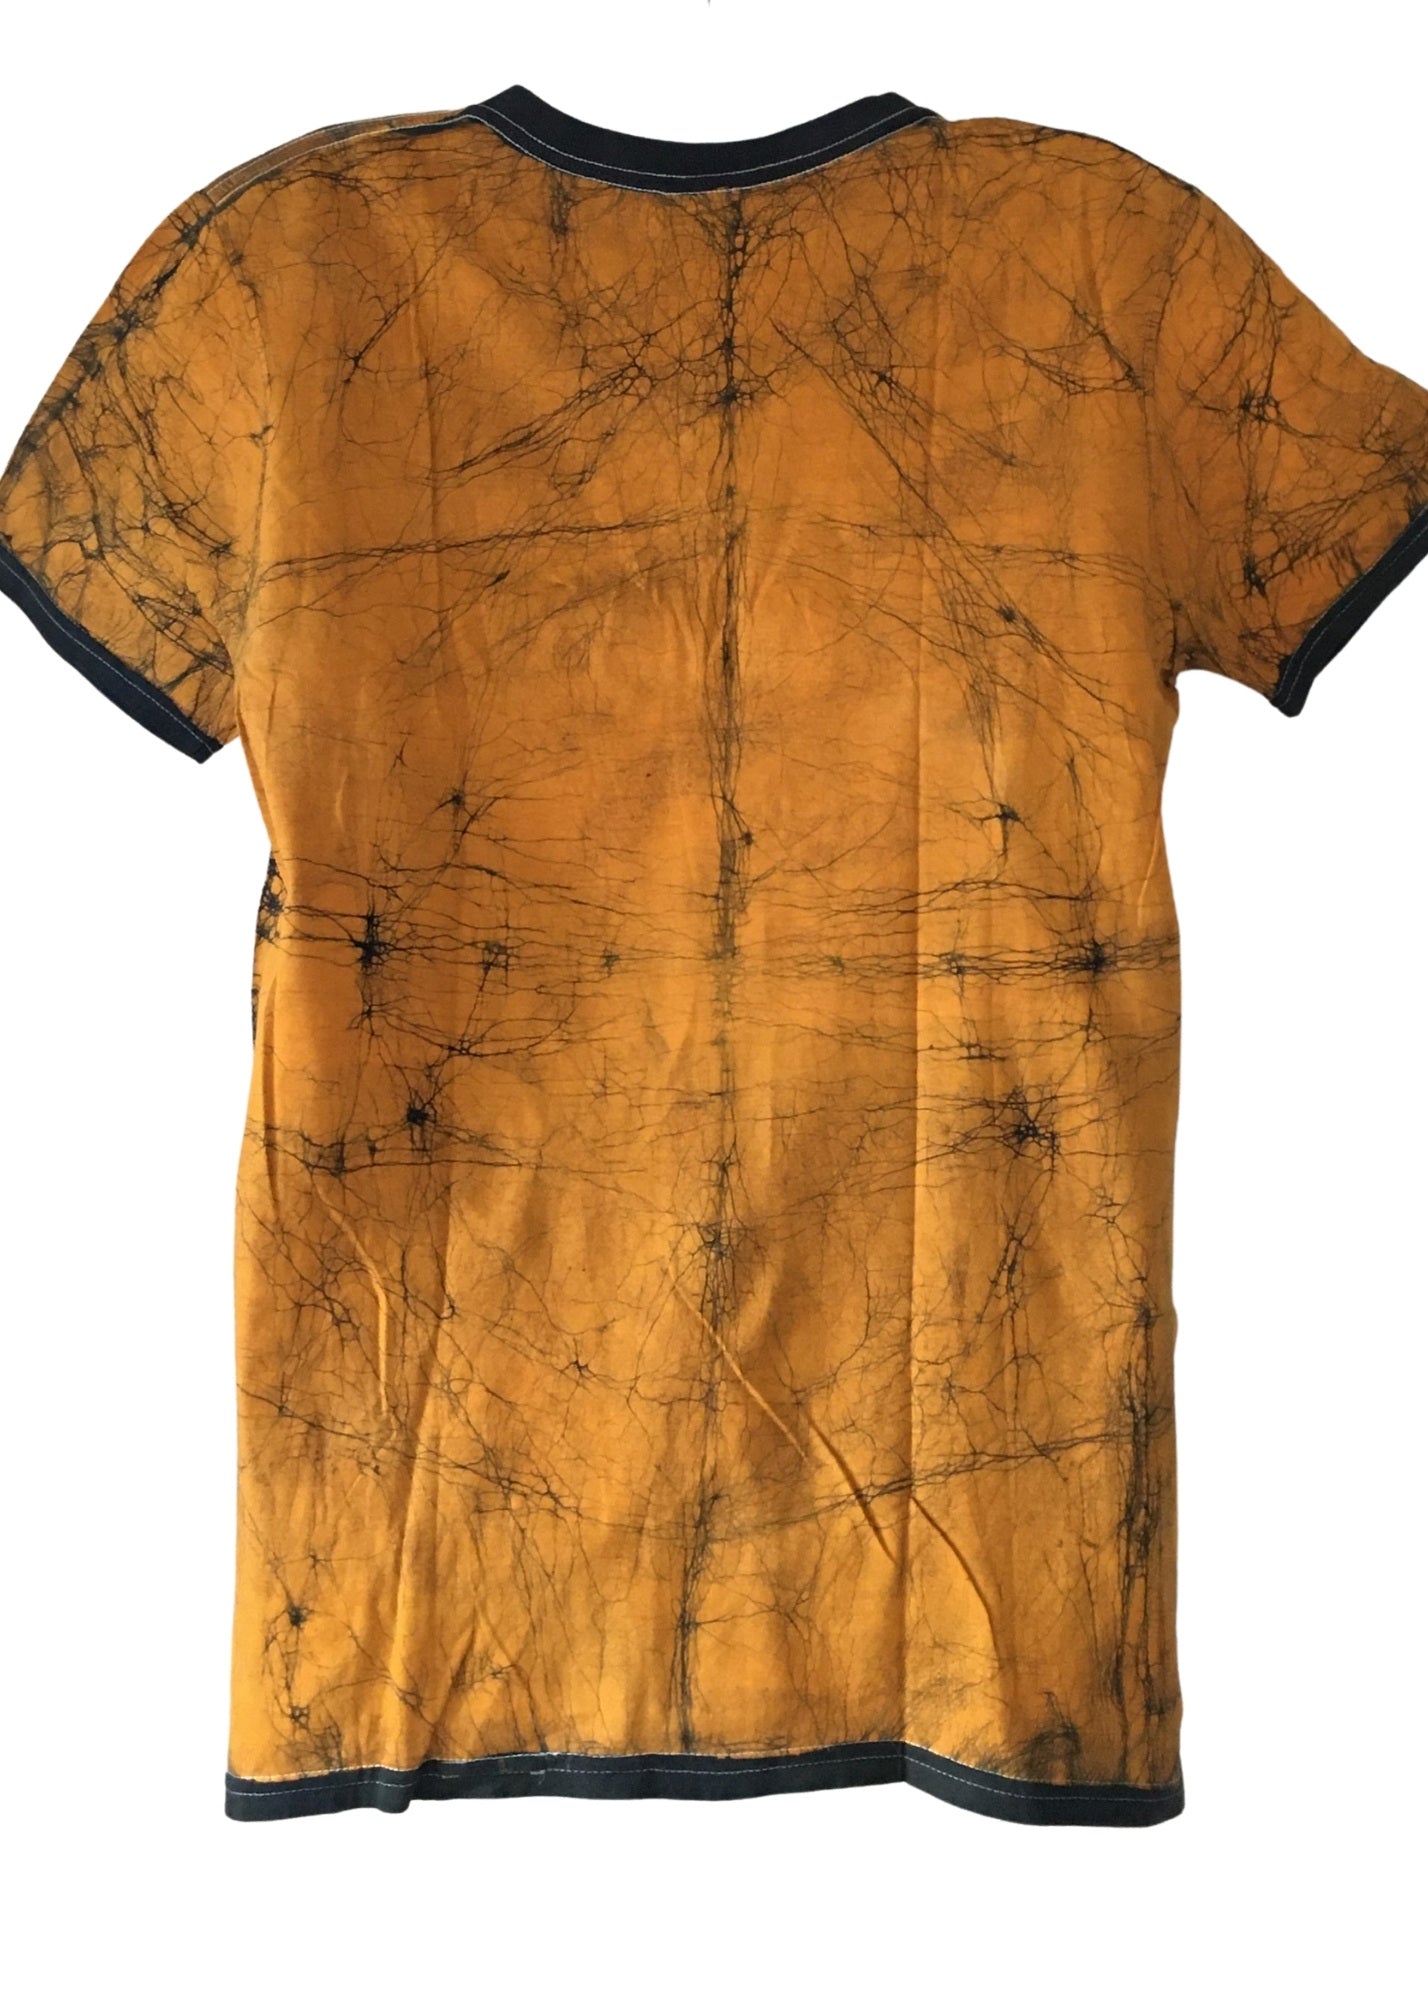 Gold and Green V neck T-shirt with Adinkra Symbols | Contemporary and Colorful Ensemble